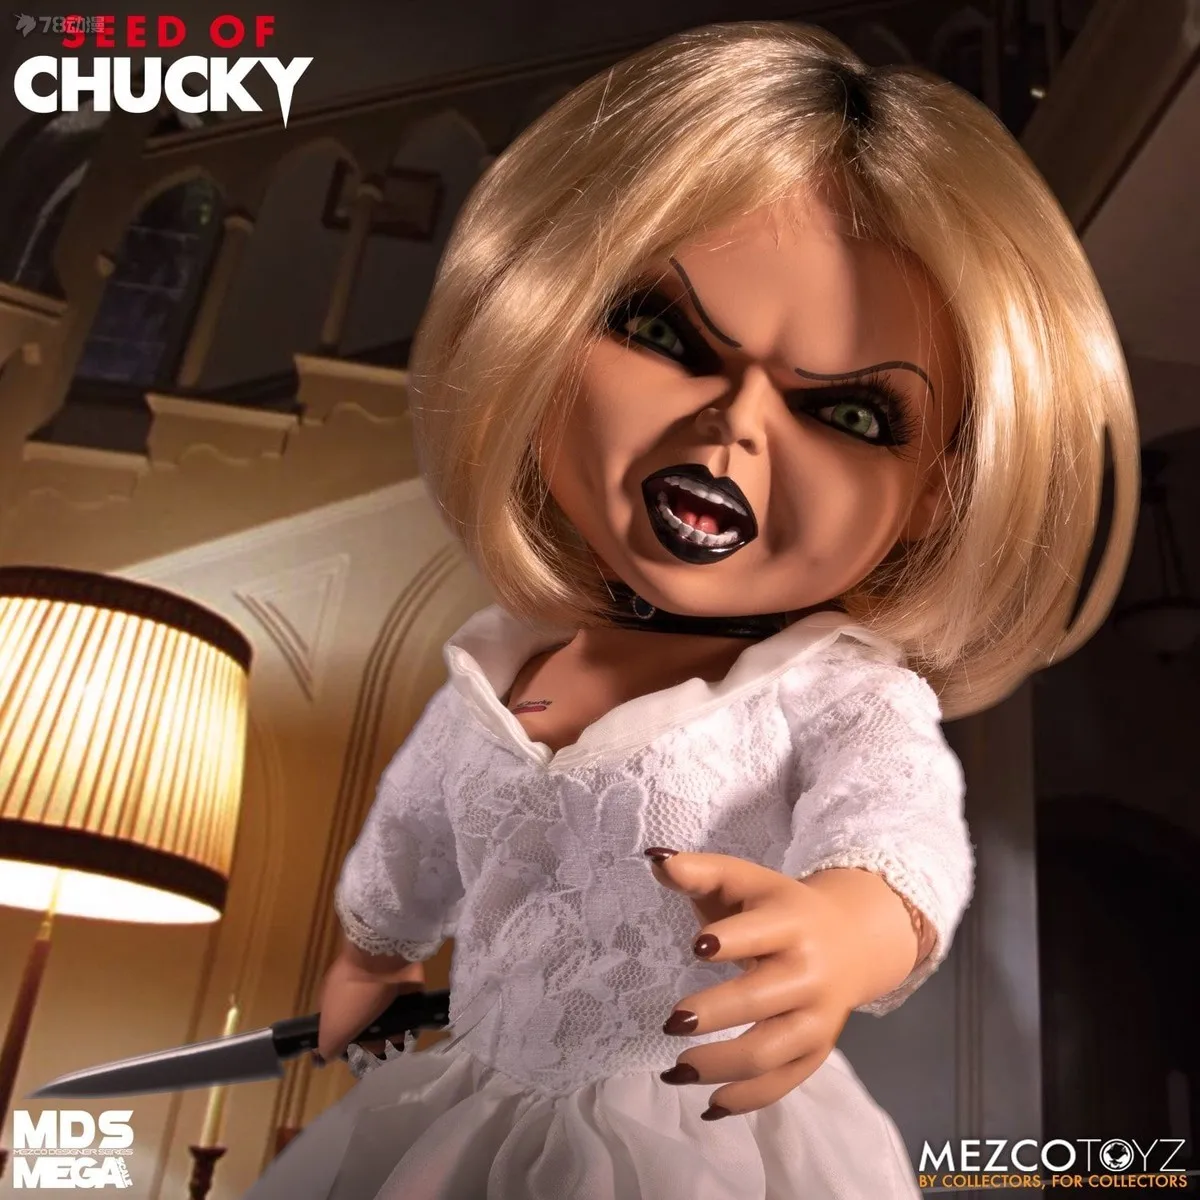 Chucky Tiffany Action Figures Seed Chucky Tiffany Doll Chuck Tiffany Figures - Action Figures pic pic